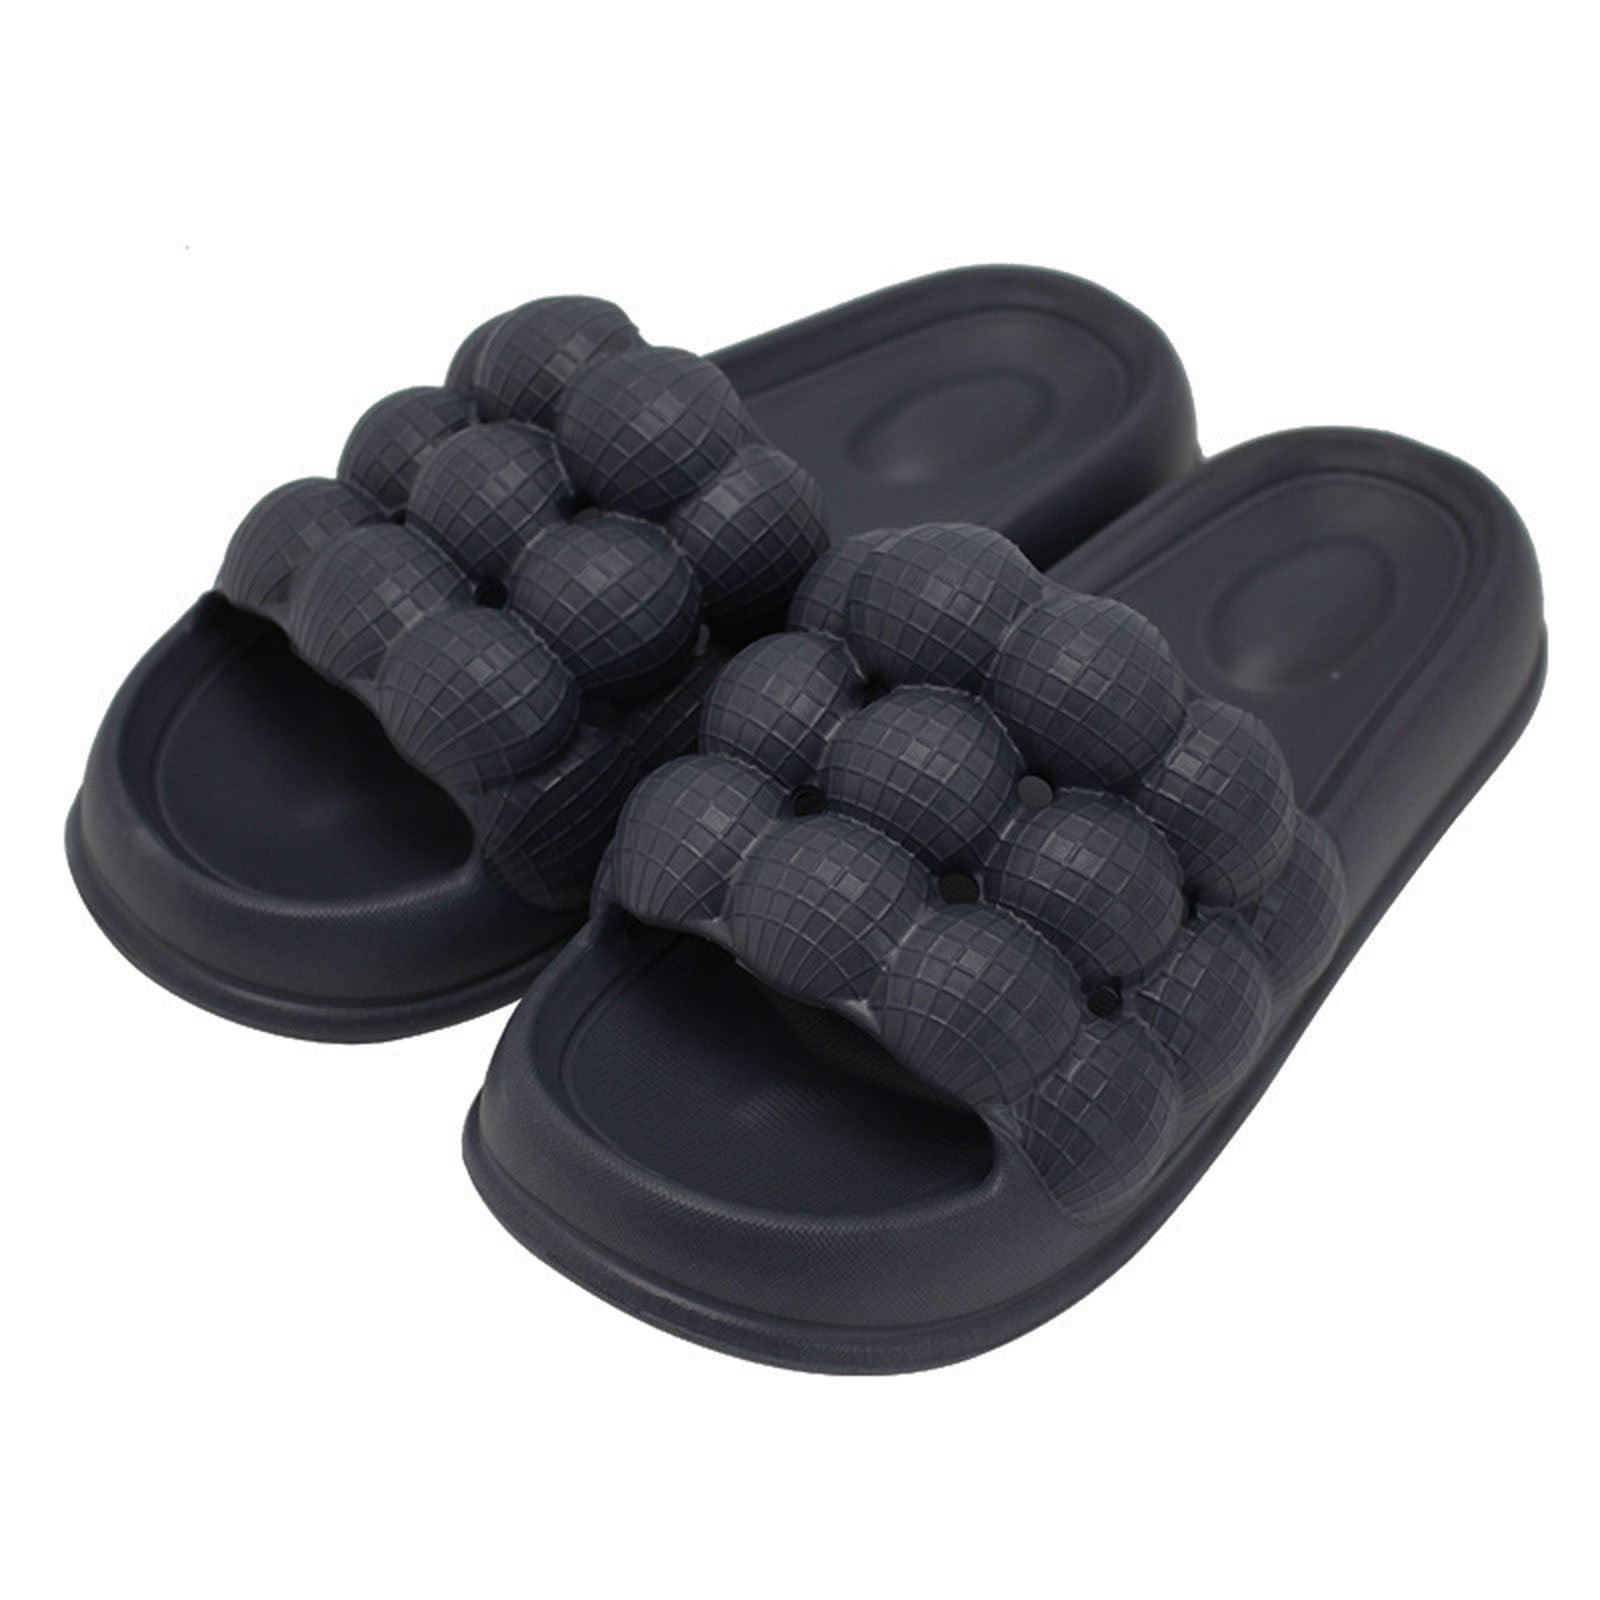 Midsumdr Massage Bubble Slides with charms for Women Men, Non-slip Bubble  Slippers, Cloud Cushion Thick Sole Spa Slides Slippers for Women Shower  Bedroom Home Sandals 